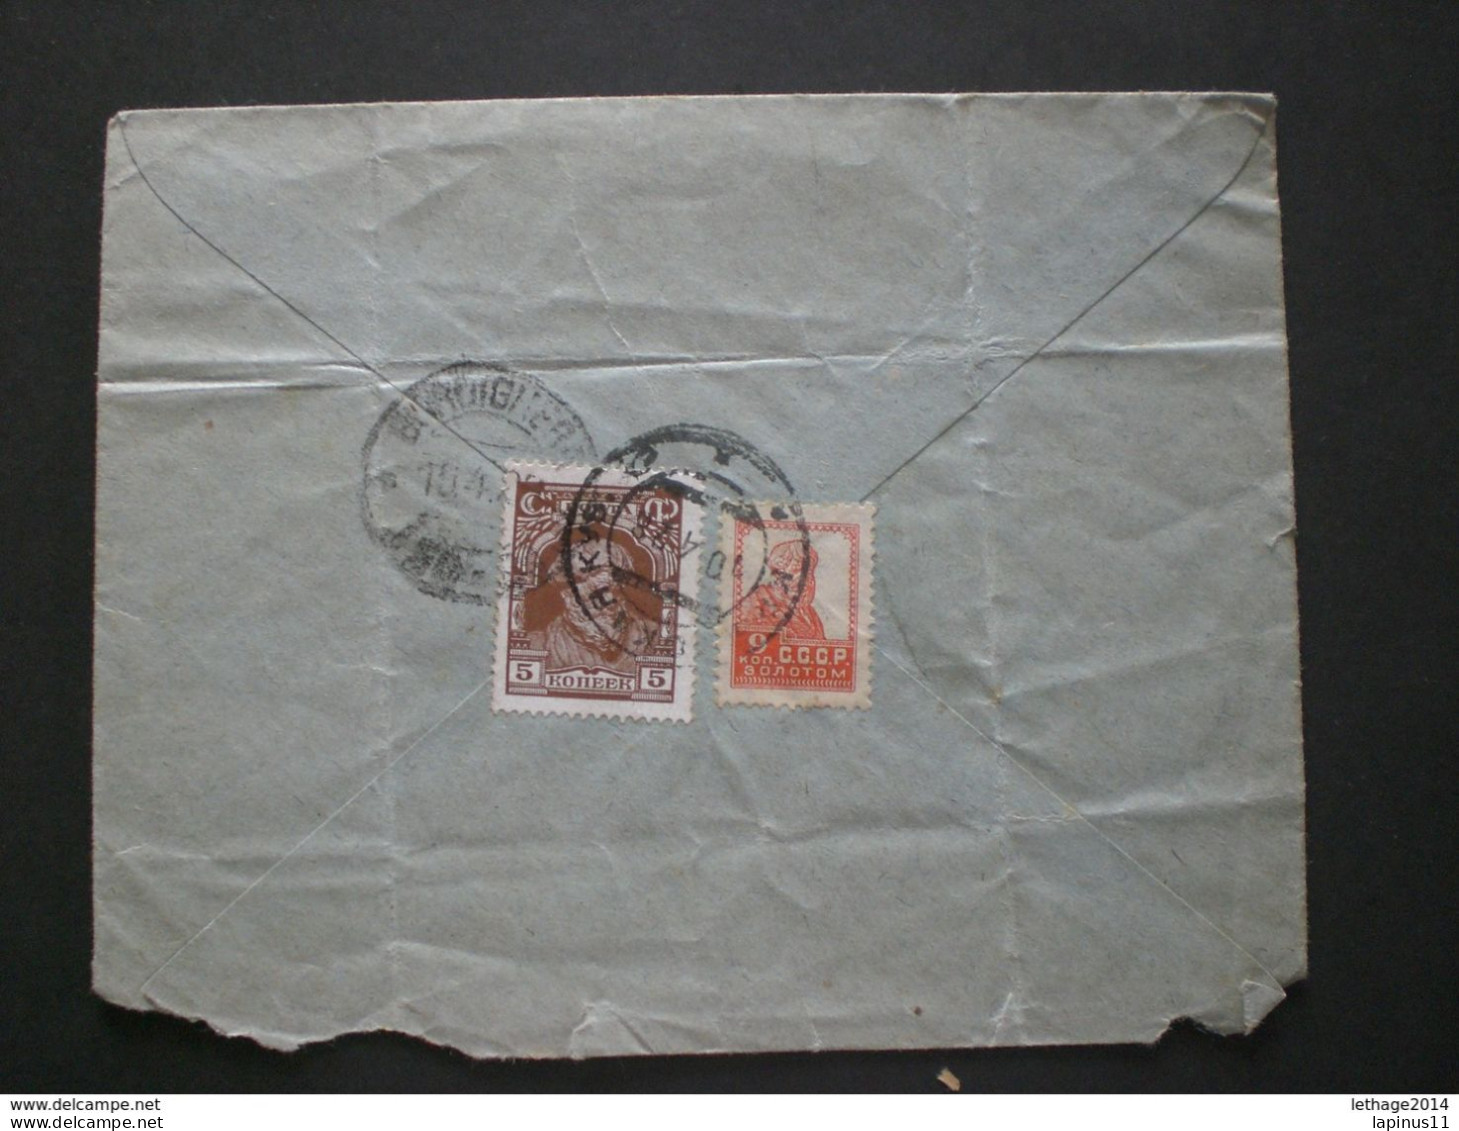 RUSSIA RUSSIE РОССИЯ STAMPS COVER 1928 RUSSLAND TO ITALY RRR RIF. TAGG (175) - Covers & Documents